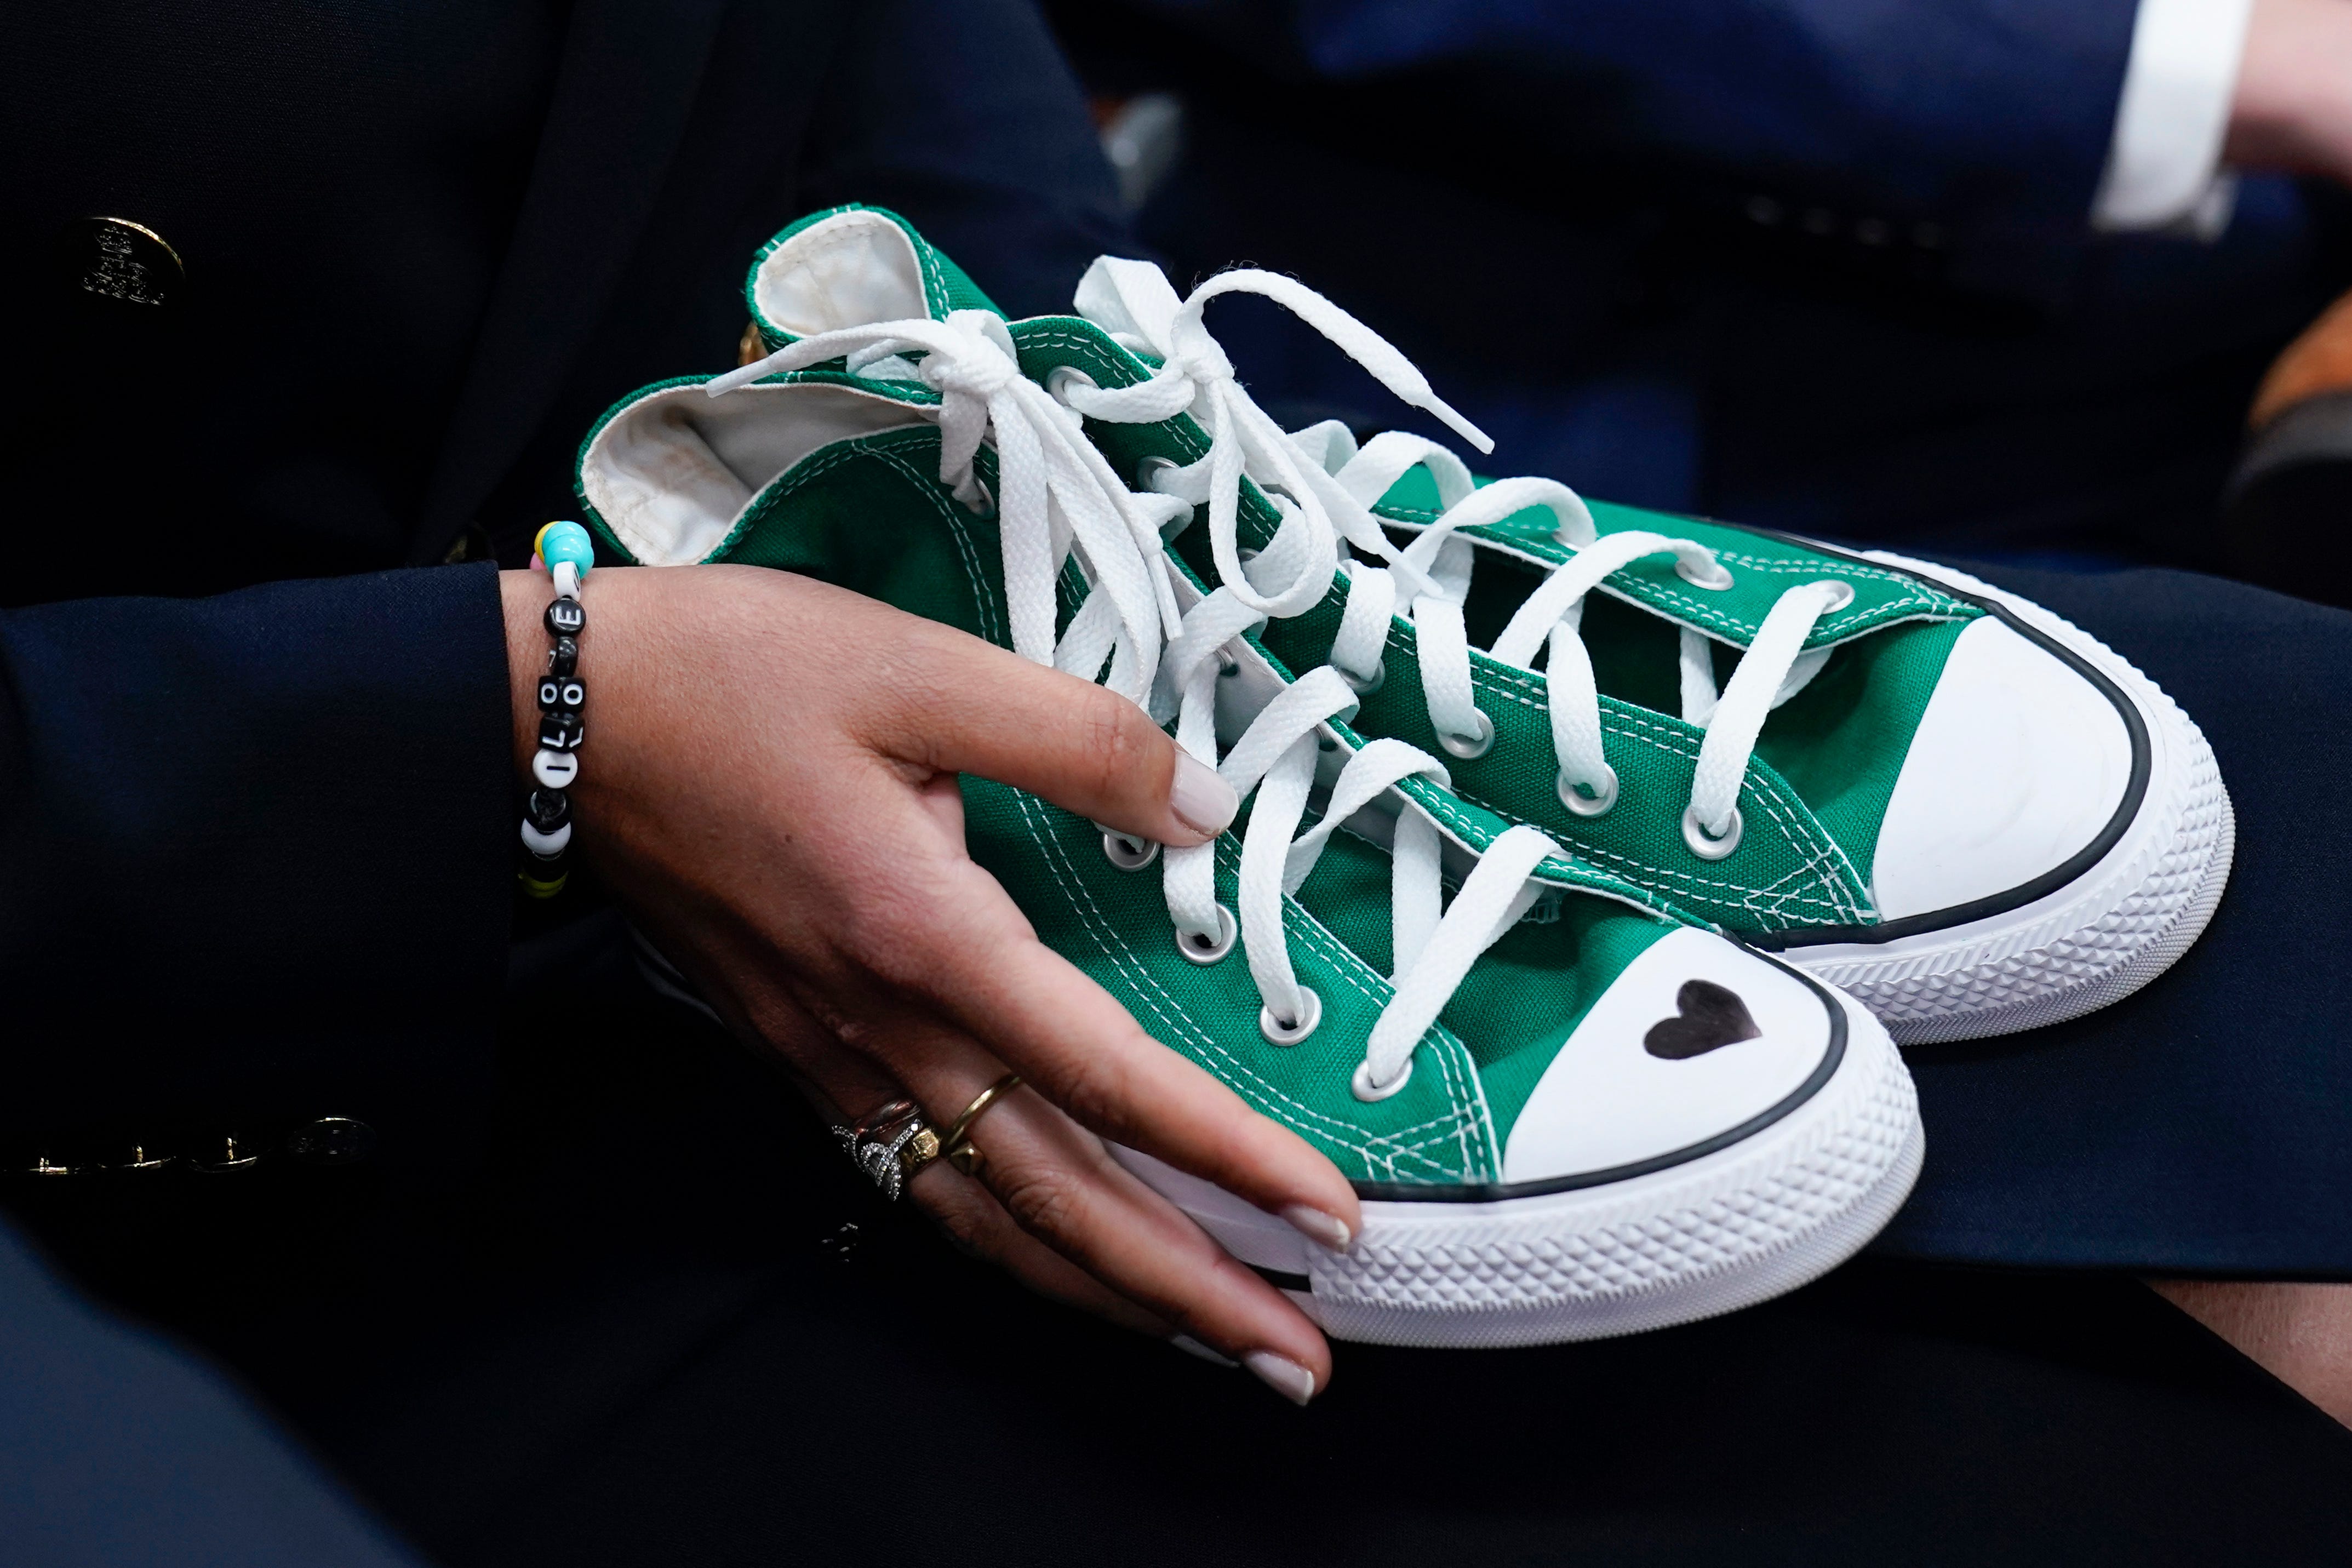 Camila Alves McConaughey holds green Converse shoes similar to those worn by shooting victim Maite Rodriguez as her husband, actor and Uvalde native Matthew McConaughey, makes a plea for gun safety legislation June 7 at the White House.